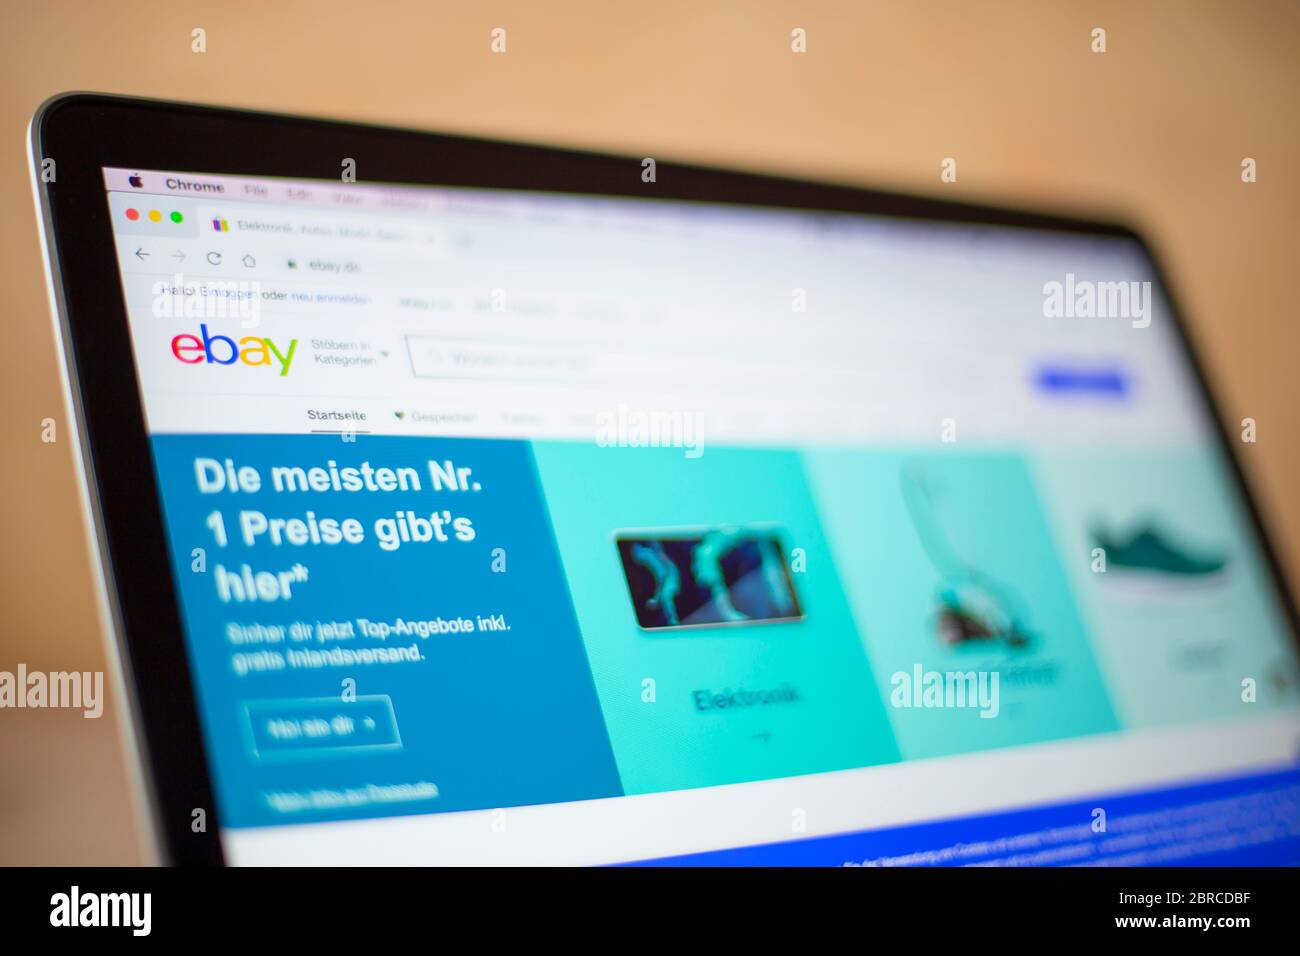 eBay web site on computer screen. eBay  is an American multinational e-commerce corporation founded at 1995. Stock Photo